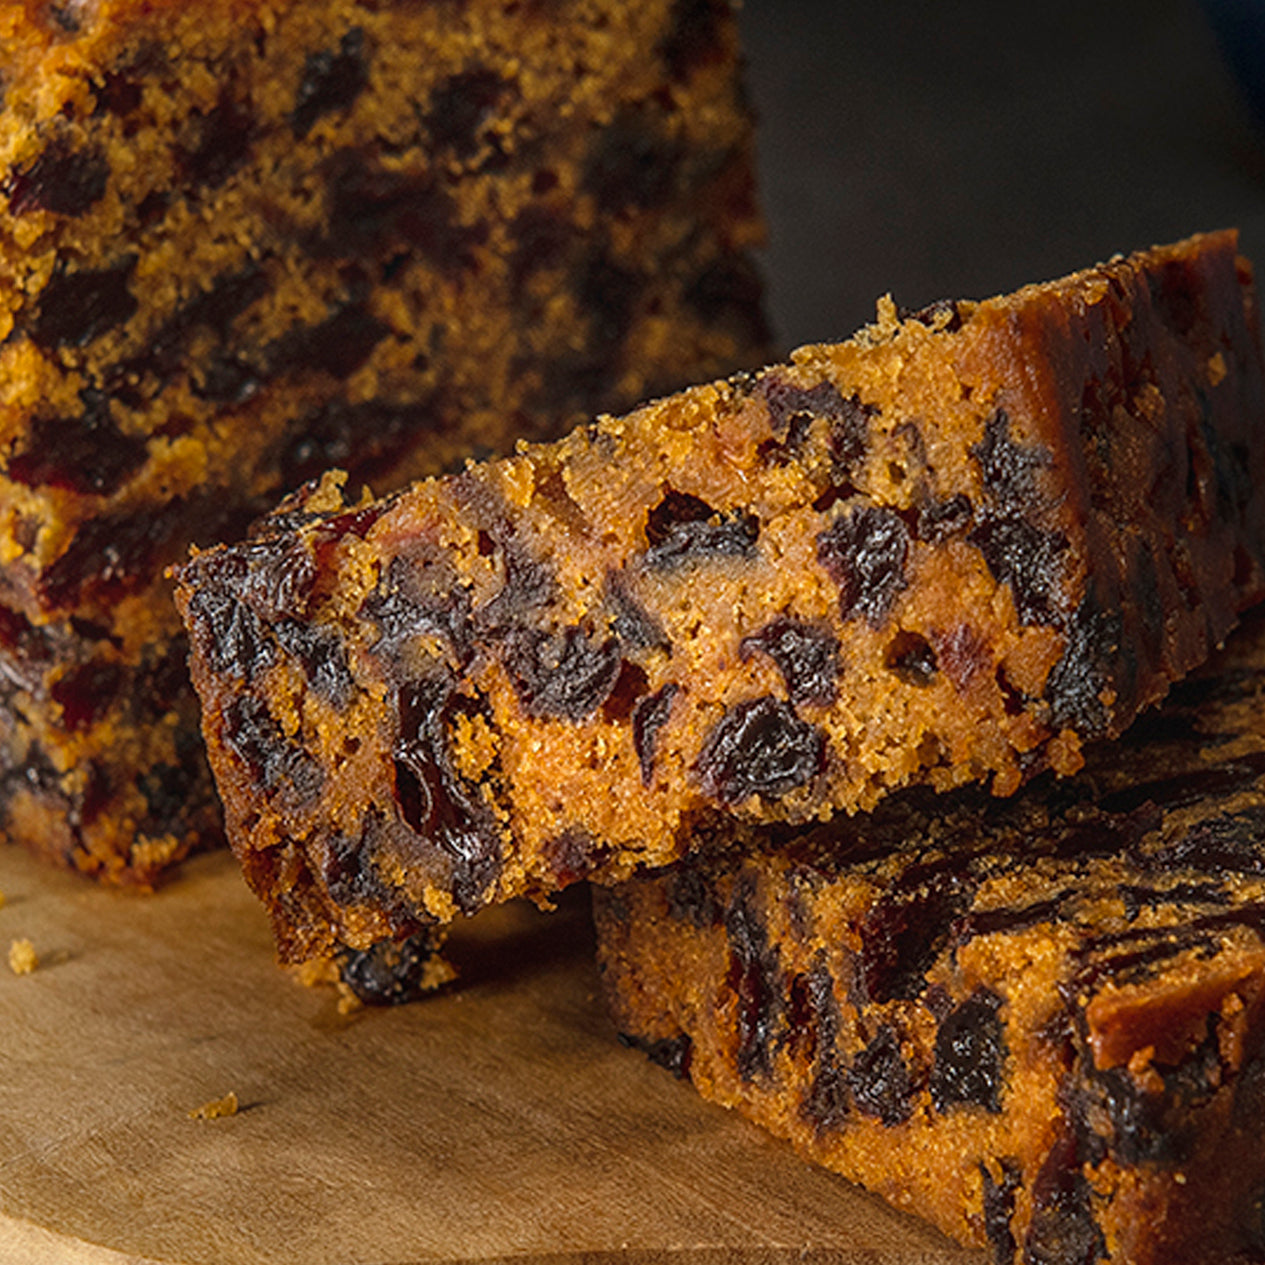 Bryson's Fruit Cake is made with butter, eggs, raw sugar, currants, sultanas and cherries.